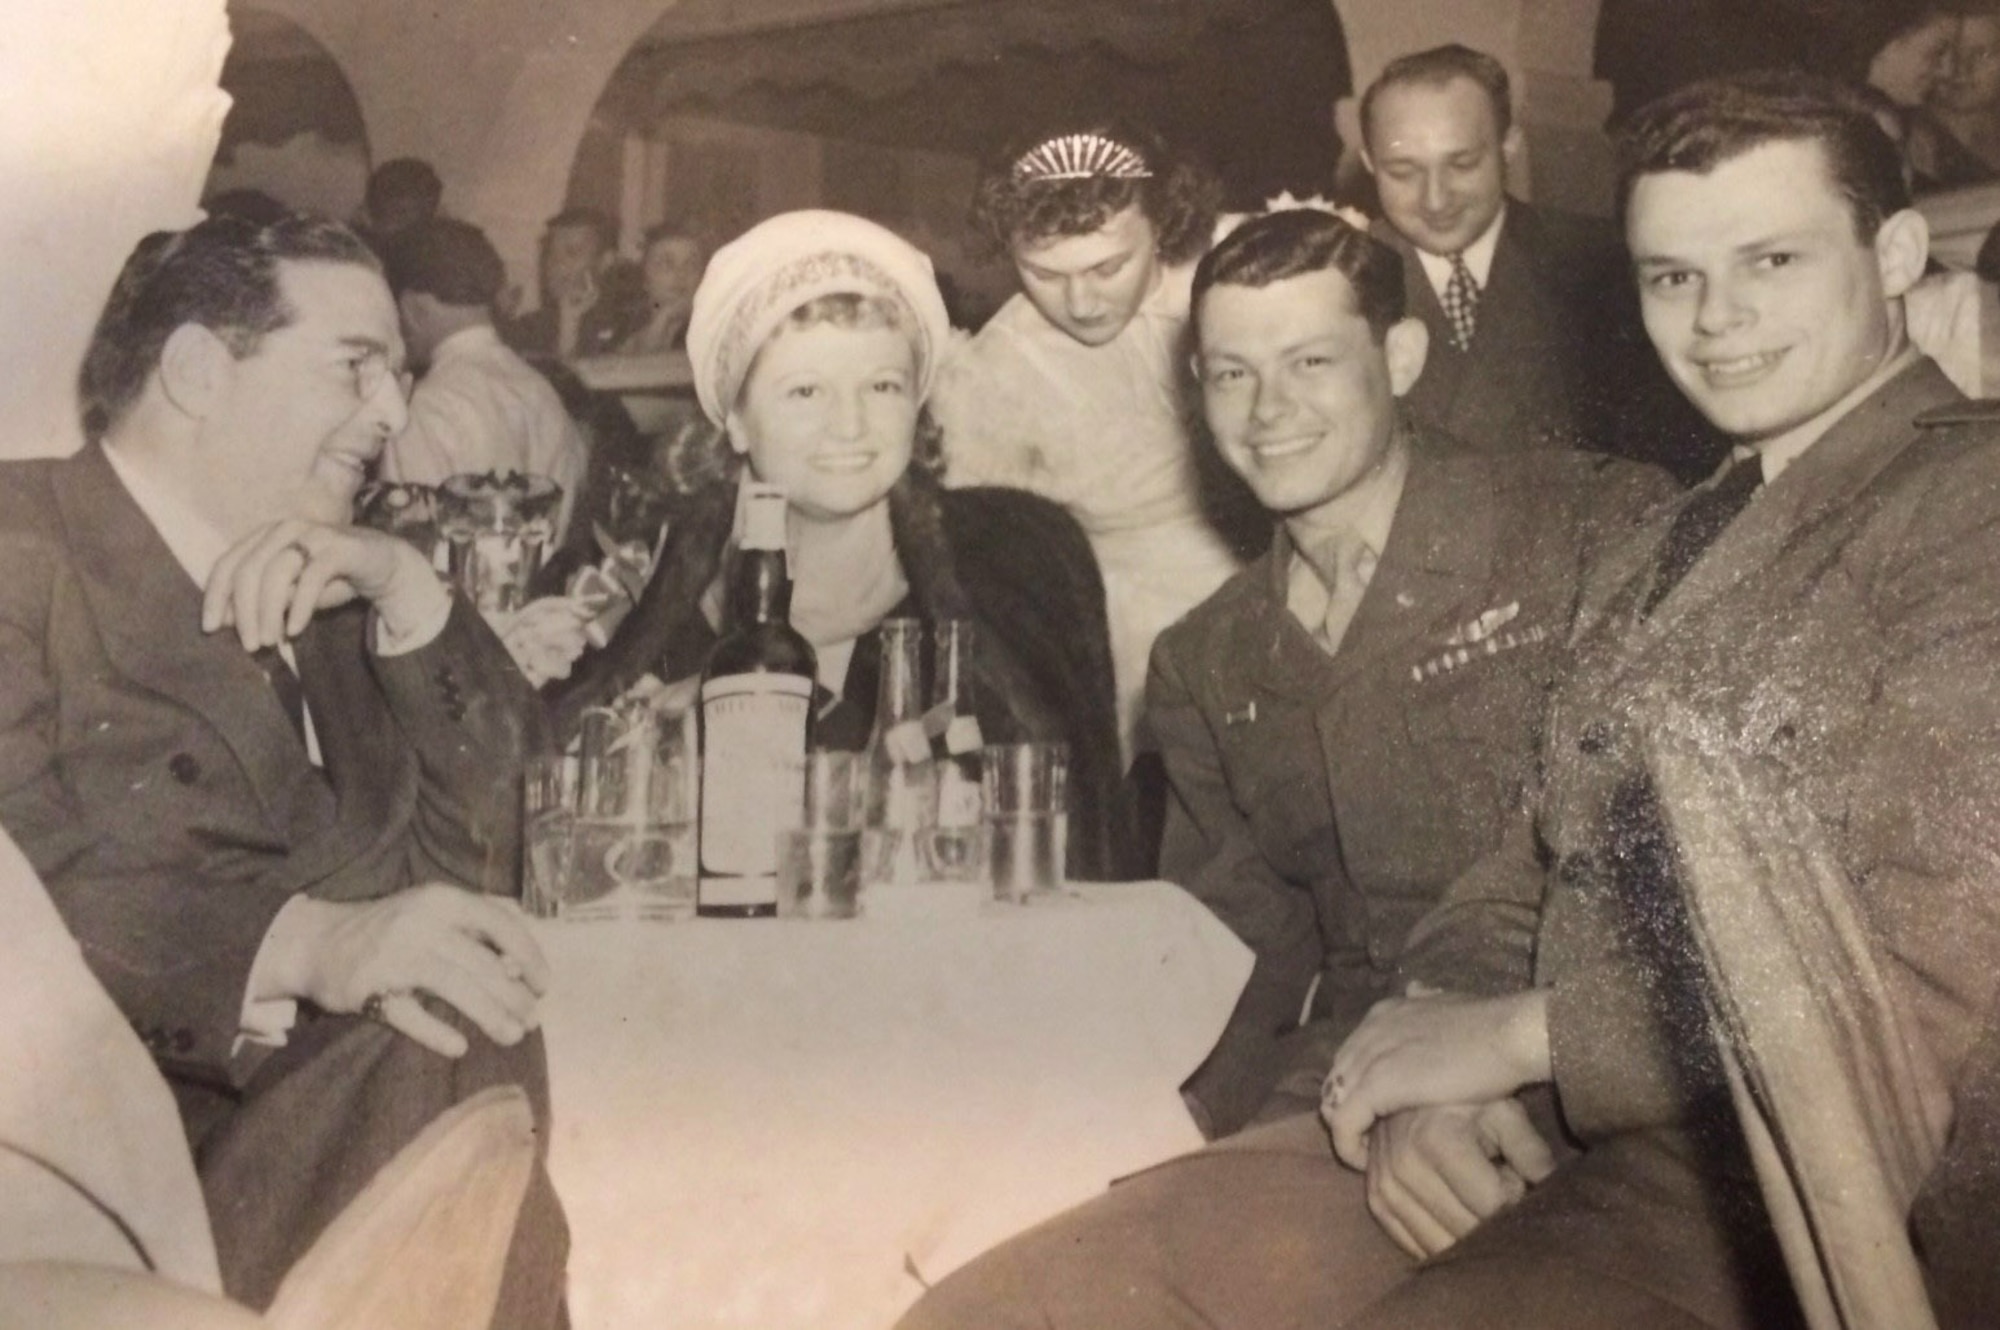 U.S. Army Air Forces 1st Lt. Robert “Bob” Wolff, second right, his brother Allan, right, and Archie Mayo, left, film director and friend of Bob Wolff’s father, celebrate at a nightclub in New York after Bob returned to the States after the end of World War II, June 5, 1945. He was a B-17 Flying Fortress pilot with the 100th Bomb Group, Thorpe Abbotts, England, and was kept as a prisoner-of-war at Stalag Luft III, Germany, for approximately 18 months. (Photo courtesy of Nancy Phelps and Bob Wolff)